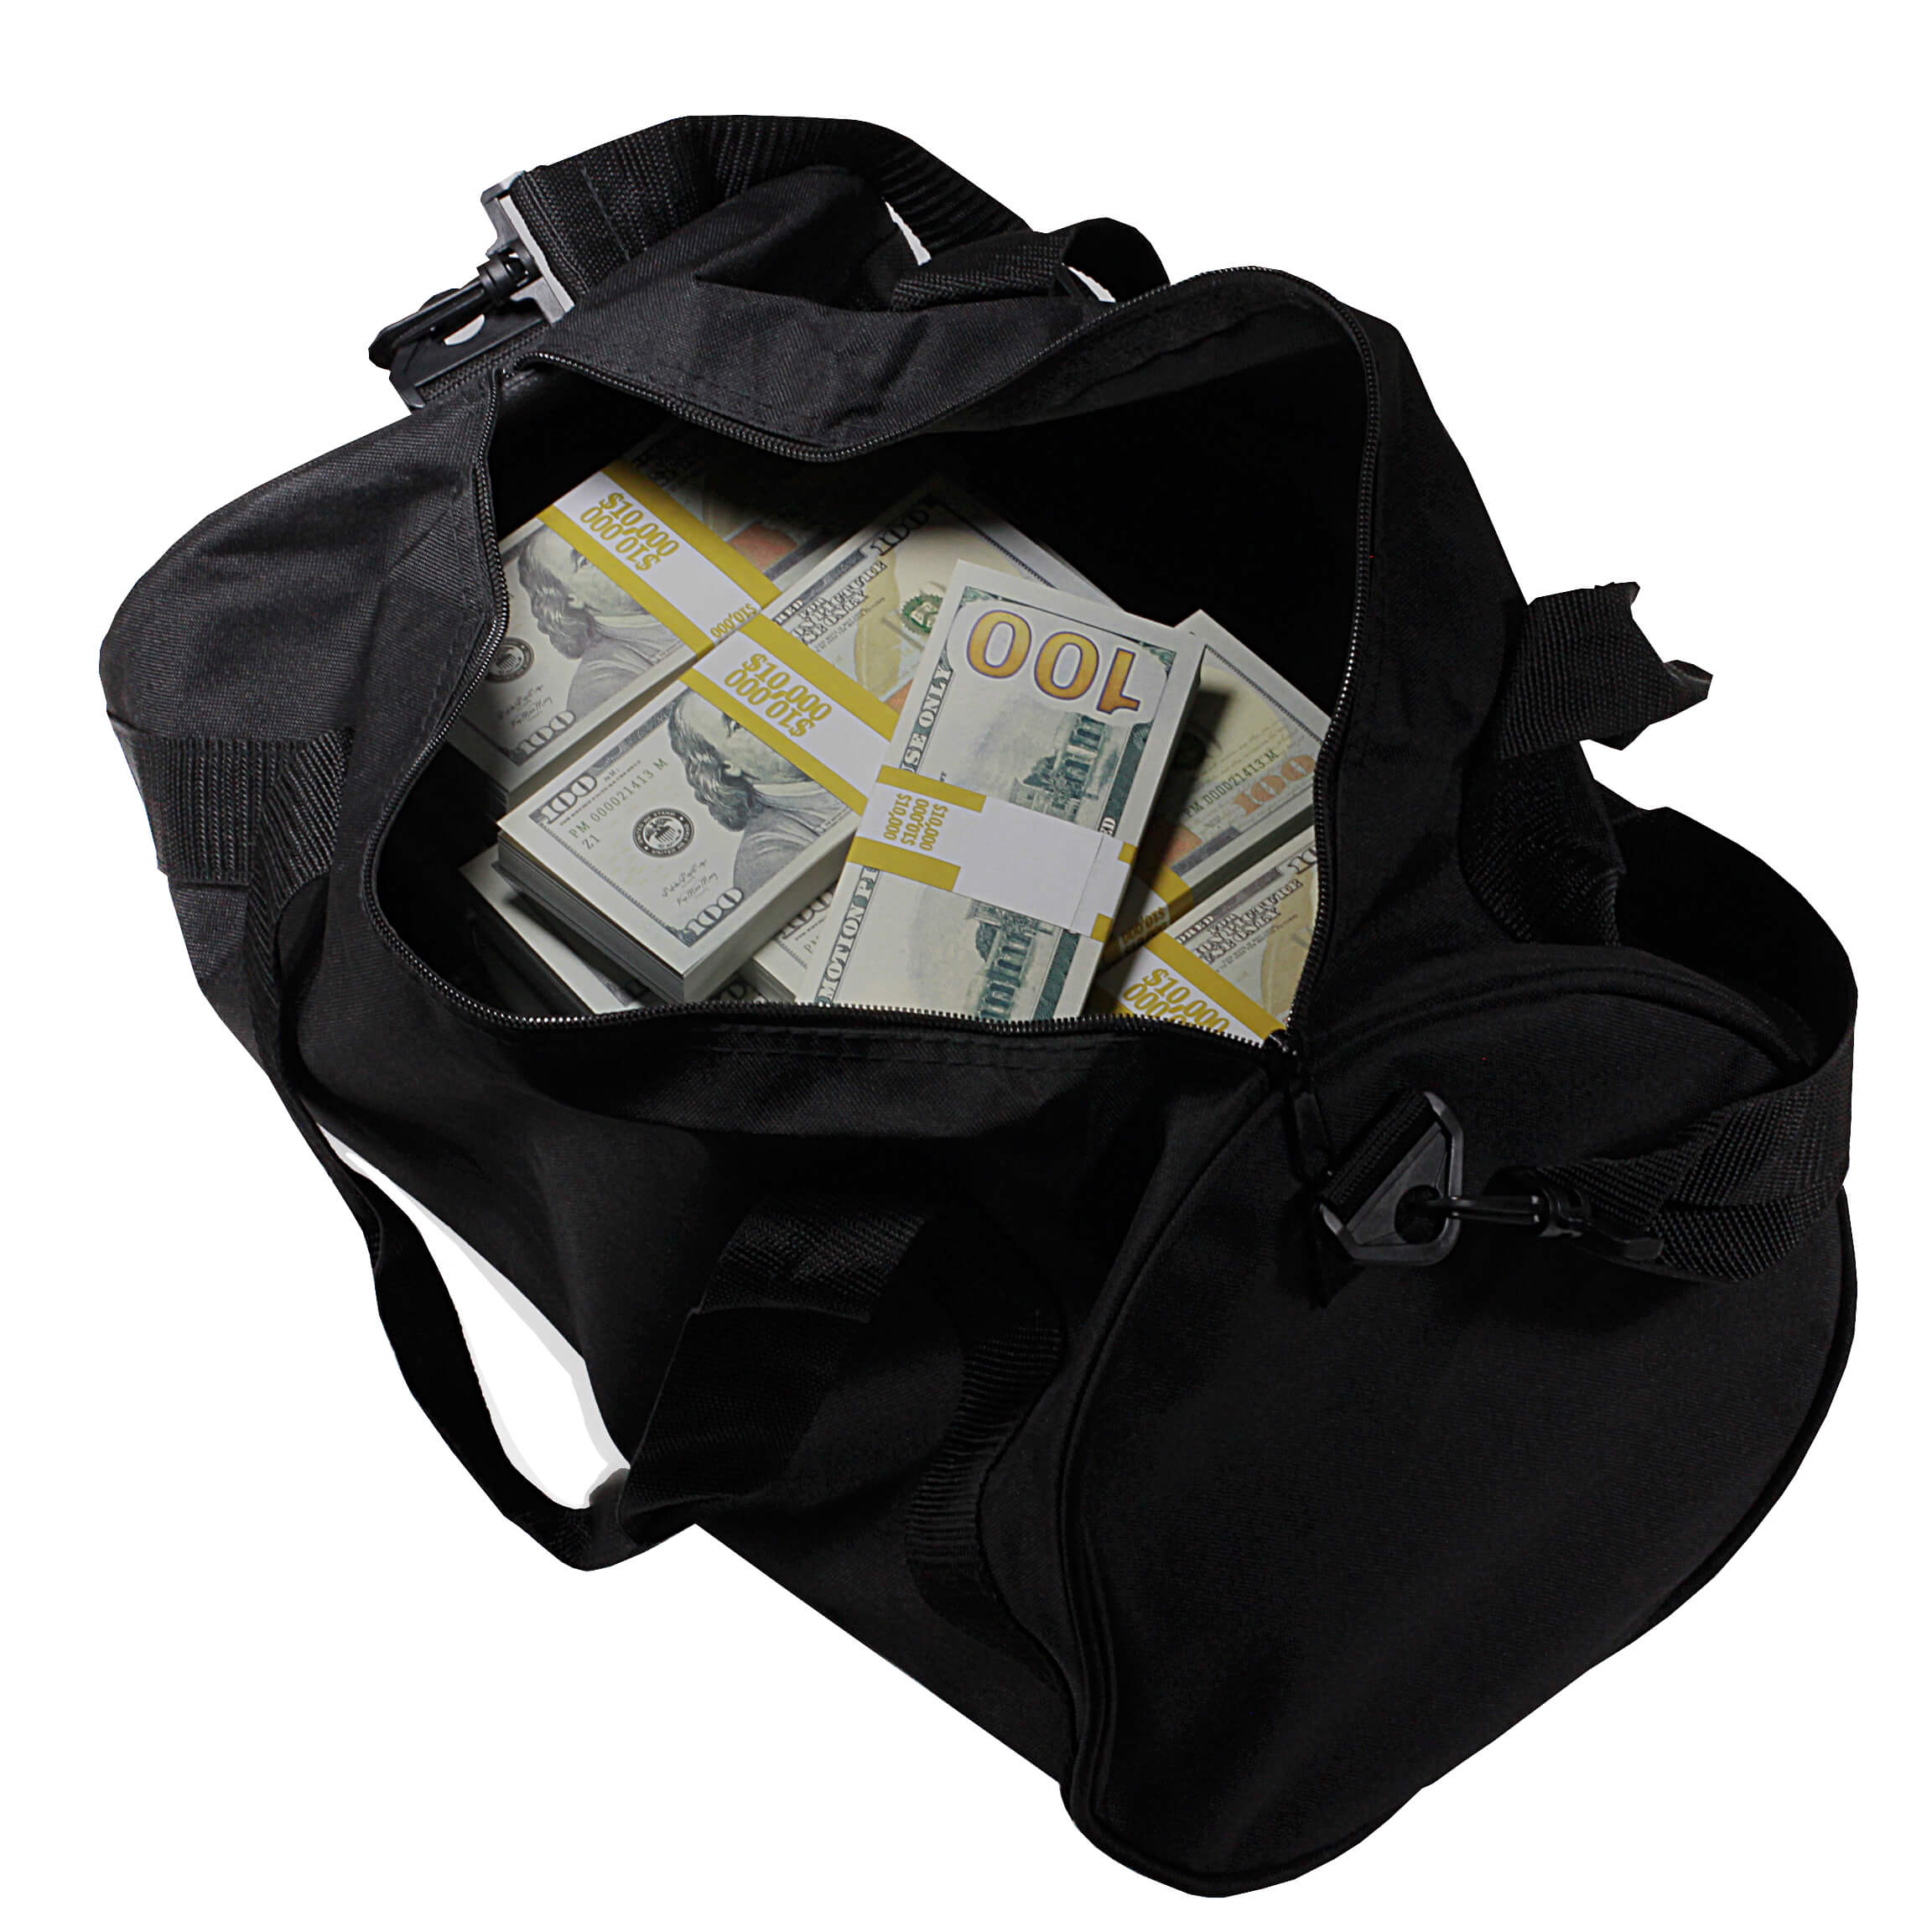 How Much?: This Duffel Bag Was Designed To Carry 1 Million Dollars